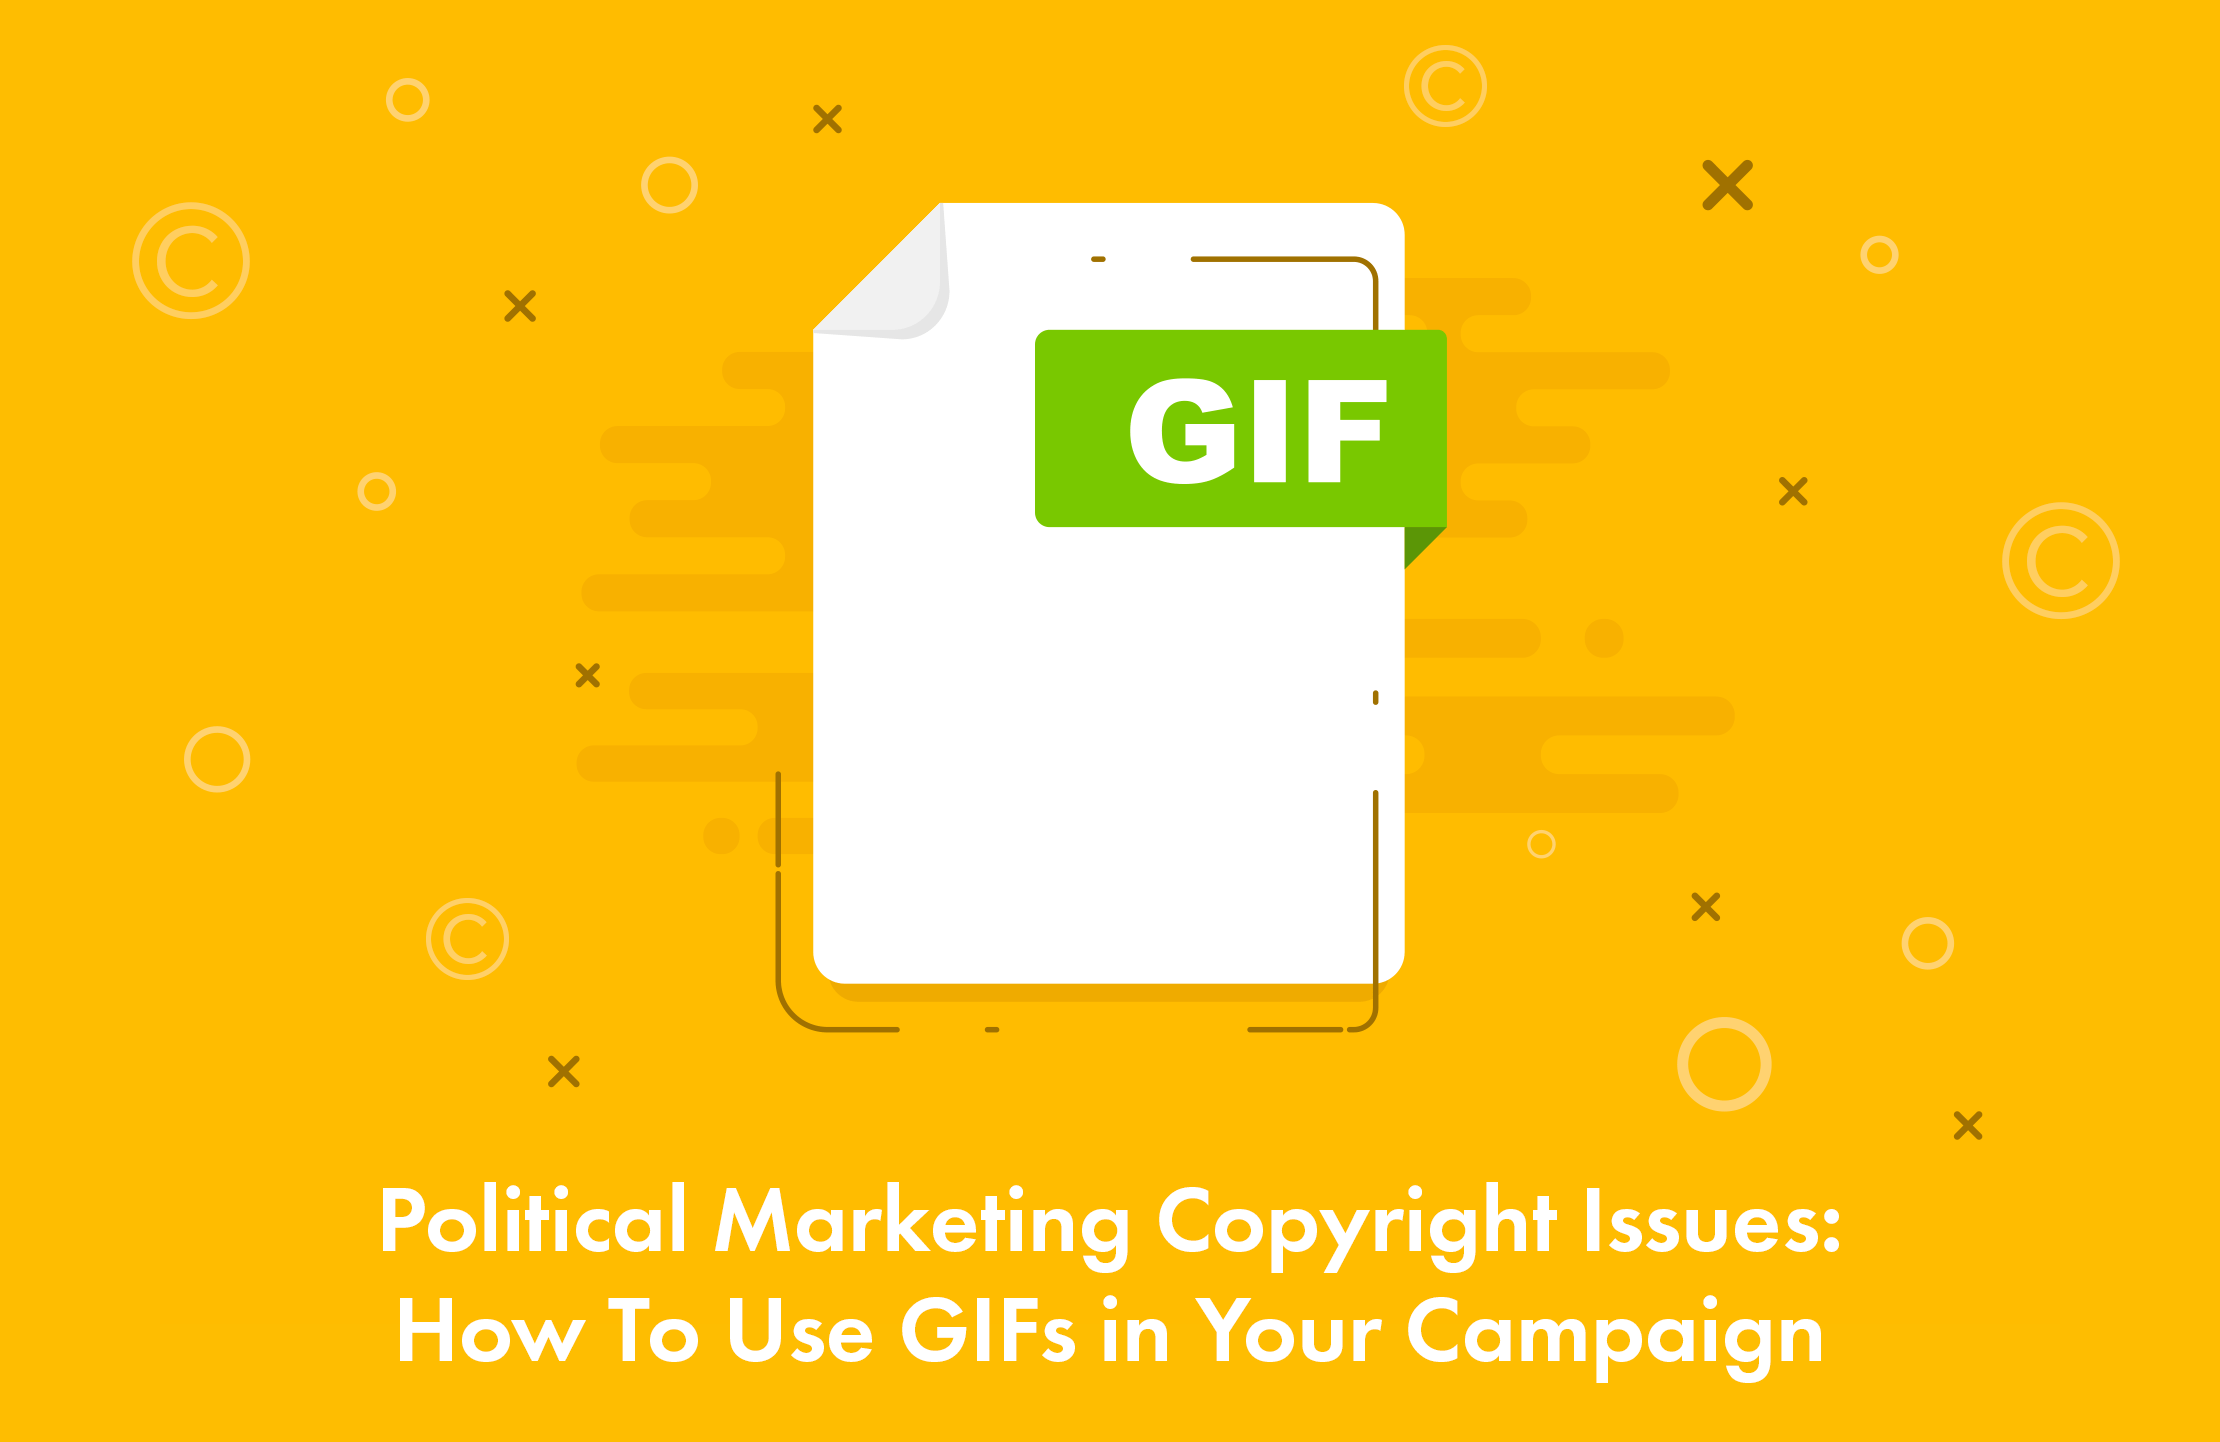 Political Marketing Copyright Issues: How to Use GIFs in Your Campaign [Video]